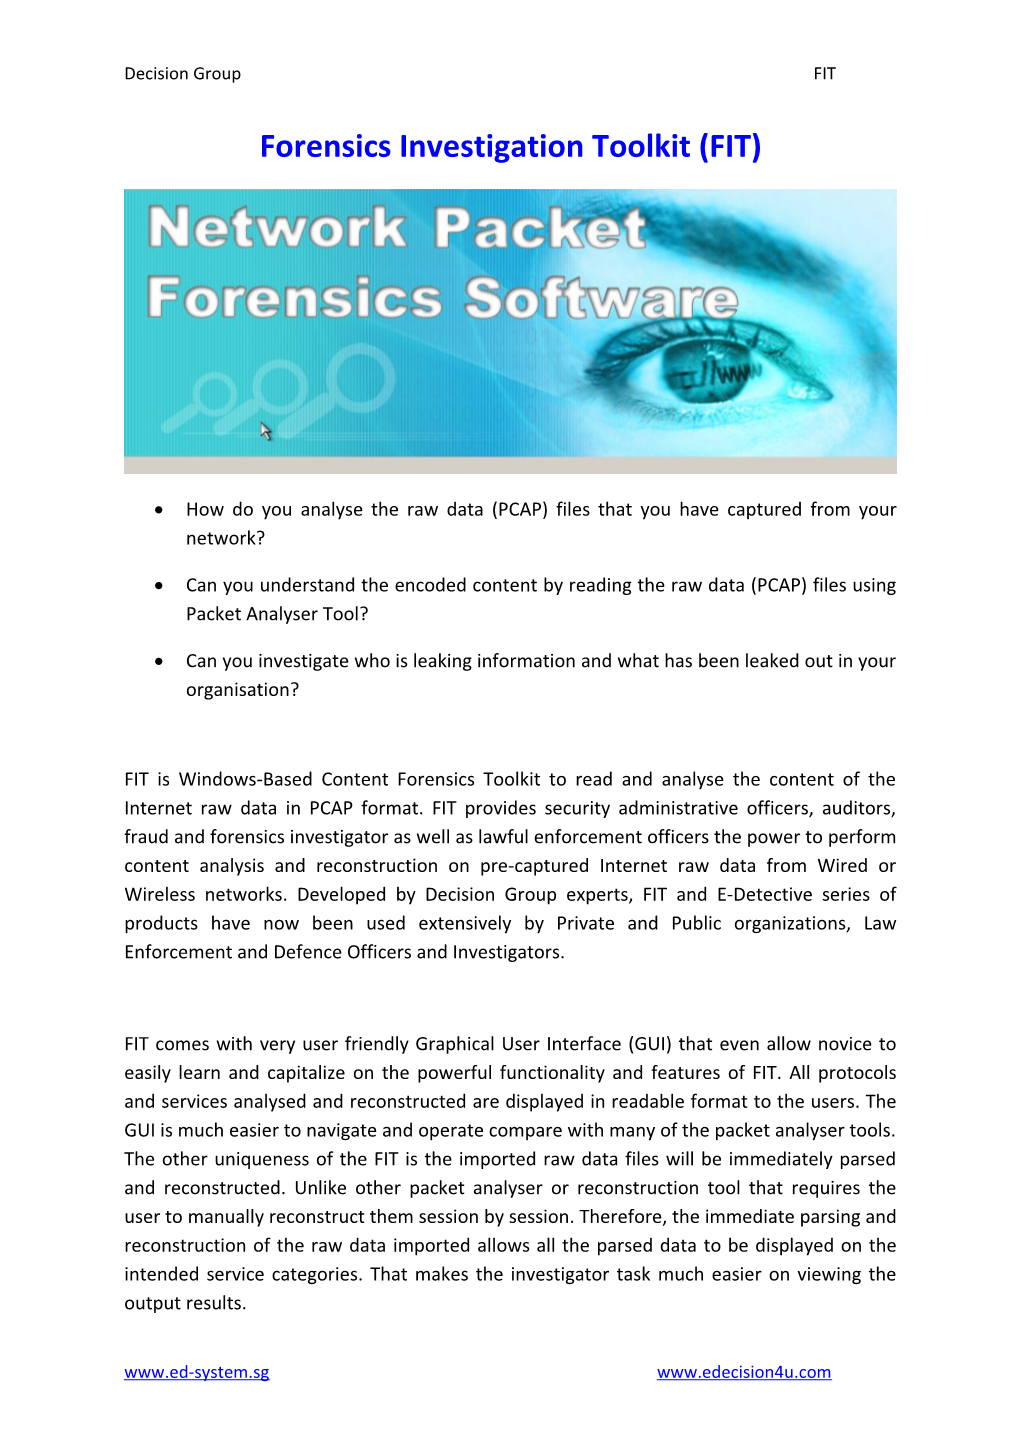 Forensics Investigation Toolkit (FIT)